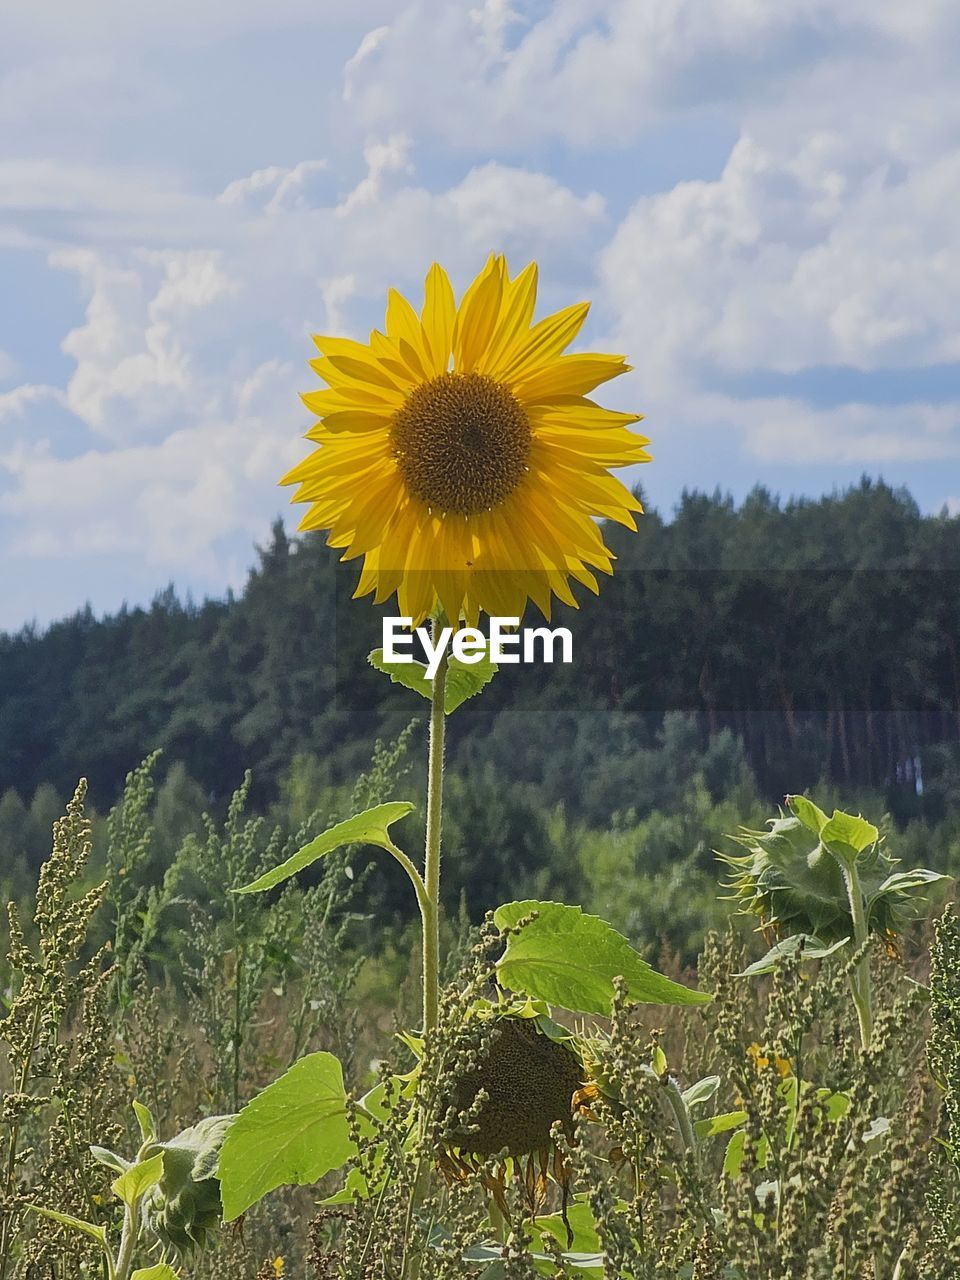 plant, flower, flowering plant, sunflower, nature, freshness, beauty in nature, growth, yellow, flower head, fragility, sunlight, inflorescence, field, cloud, sky, no people, petal, leaf, day, plant part, outdoors, water, close-up, green, landscape, environment, tree